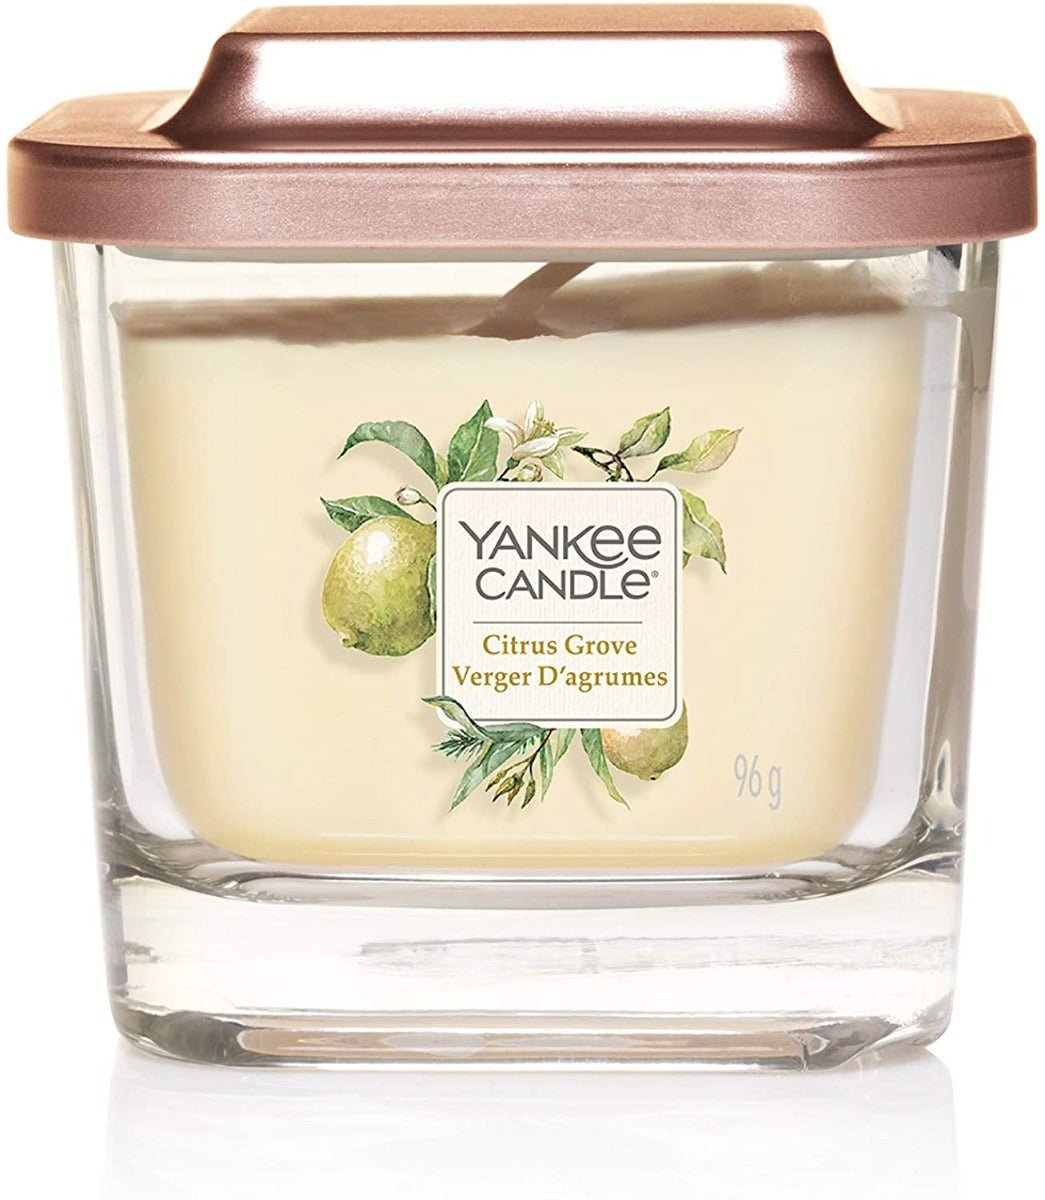 Yankee Candle Elevation Limited Edition Small Citrus Grove 96 G - AllurebeautypkYankee Candle Elevation Limited Edition Small Citrus Grove 96 G